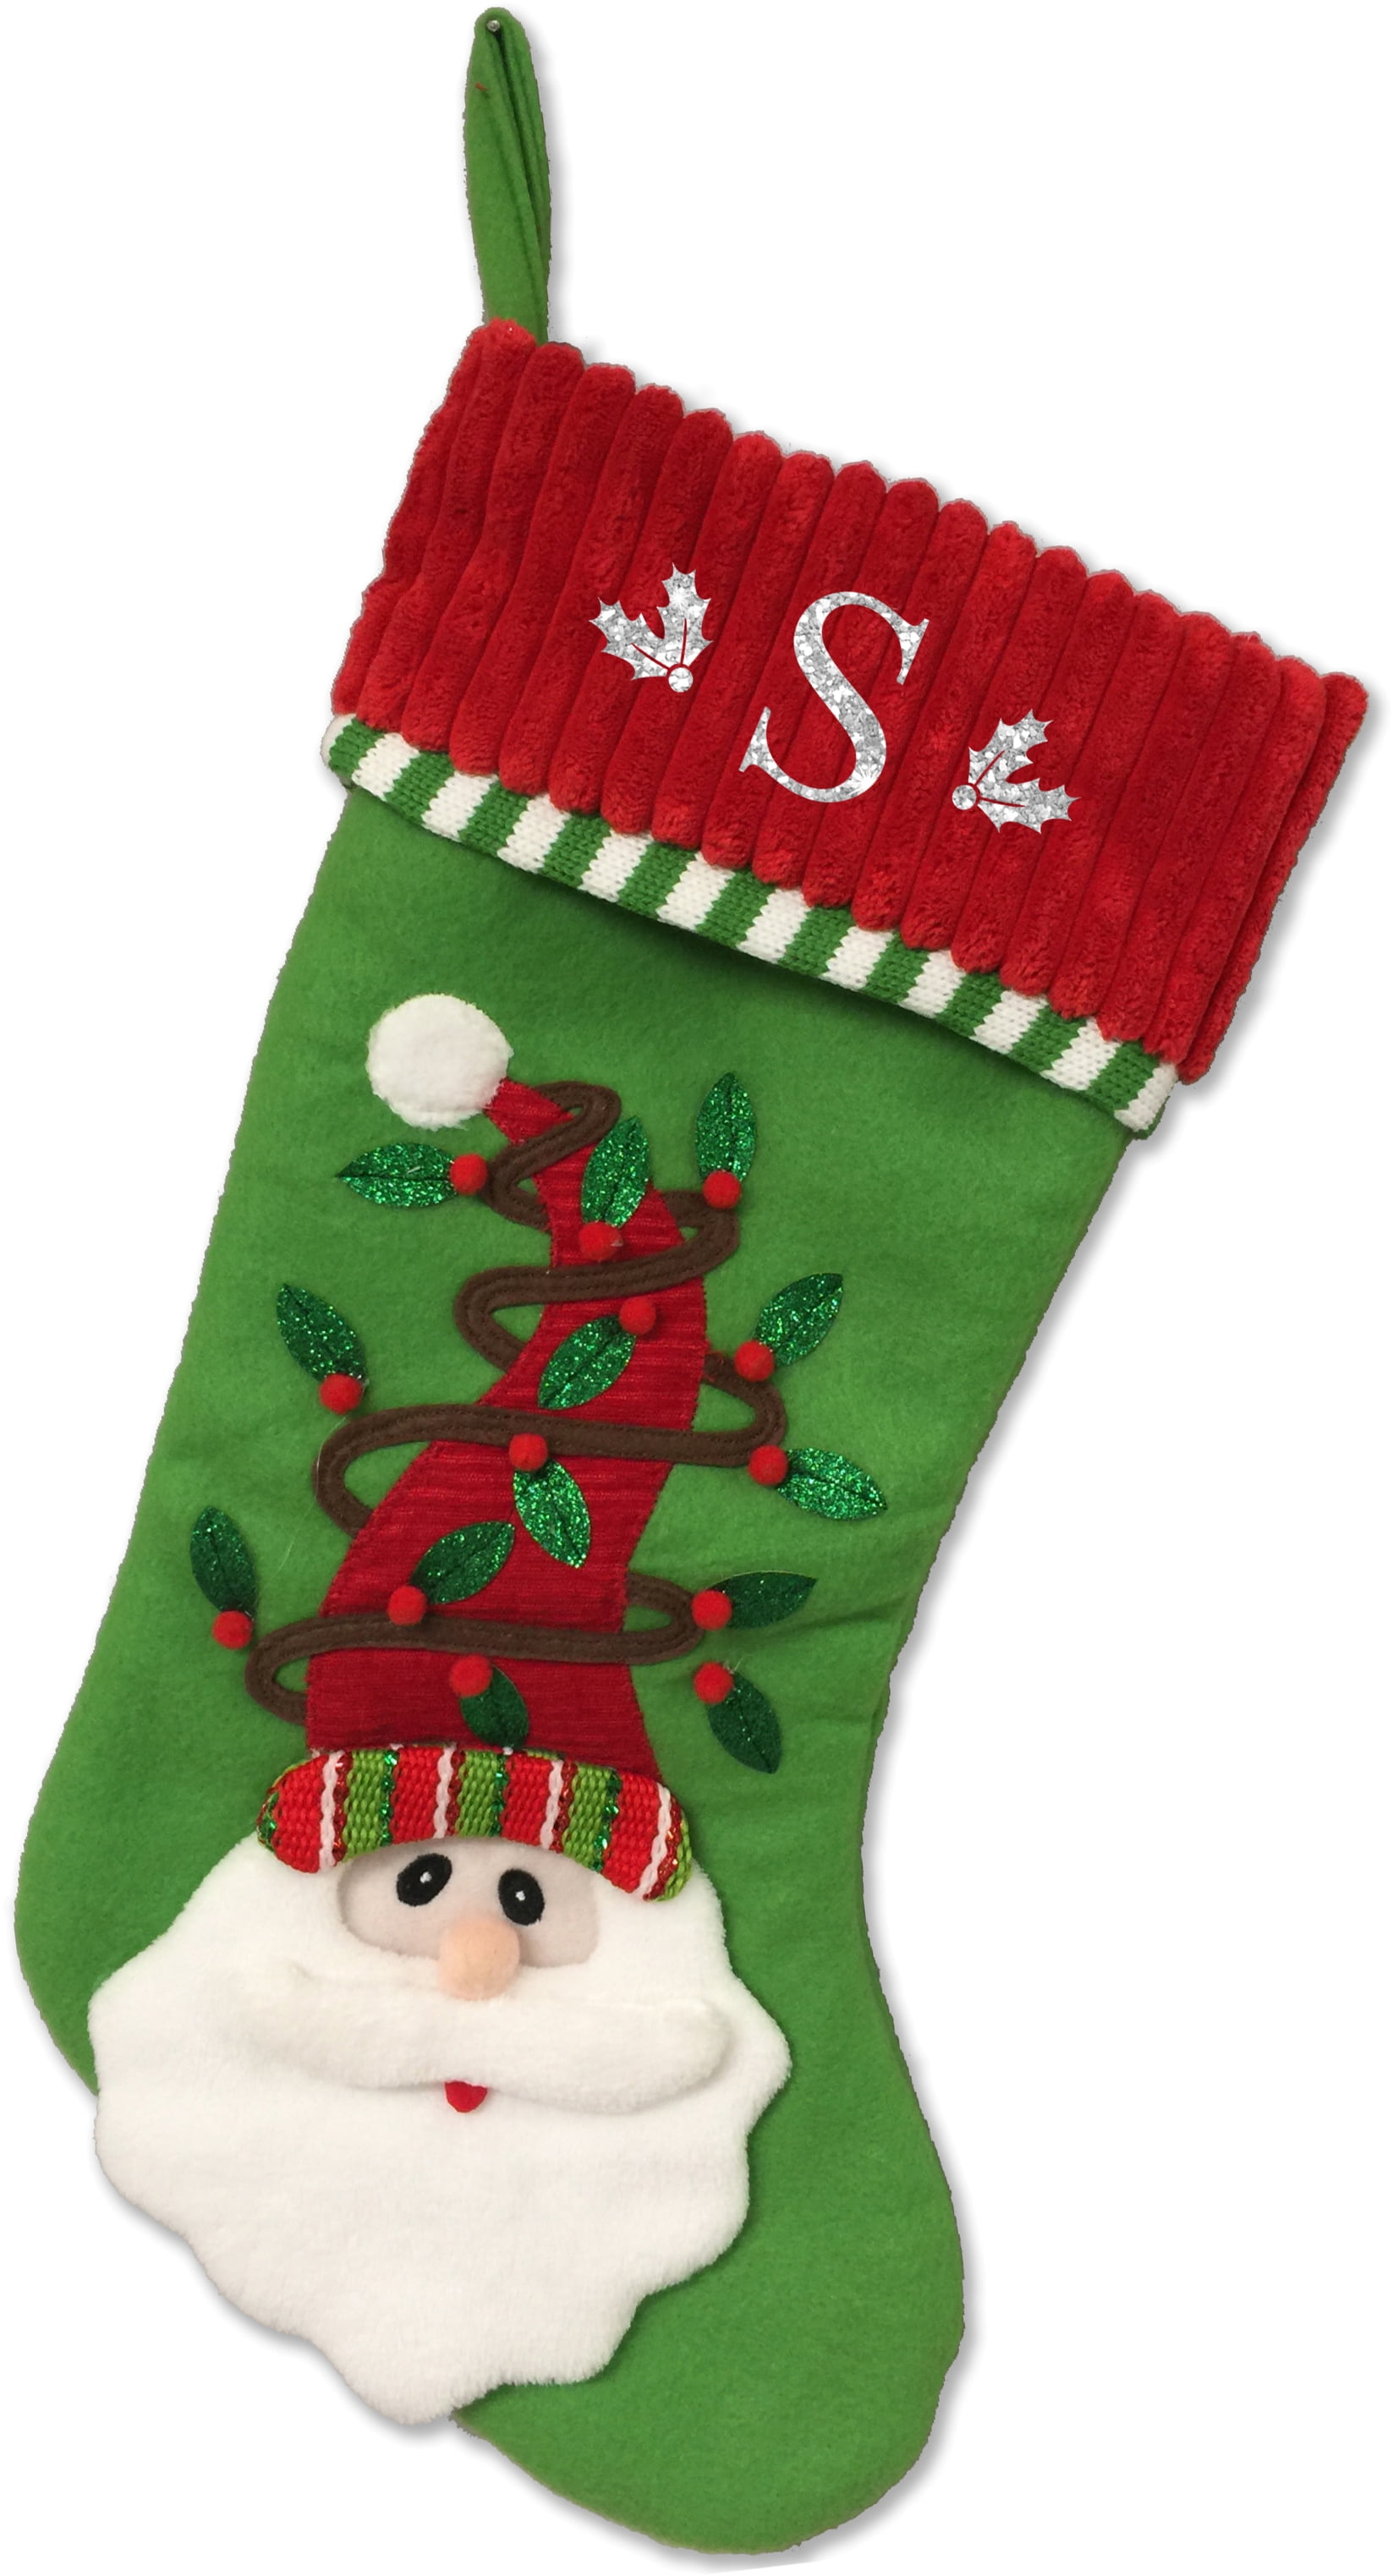 Monogrammed Christmas Stocking, Santa with Applique Leaves with Serif ...